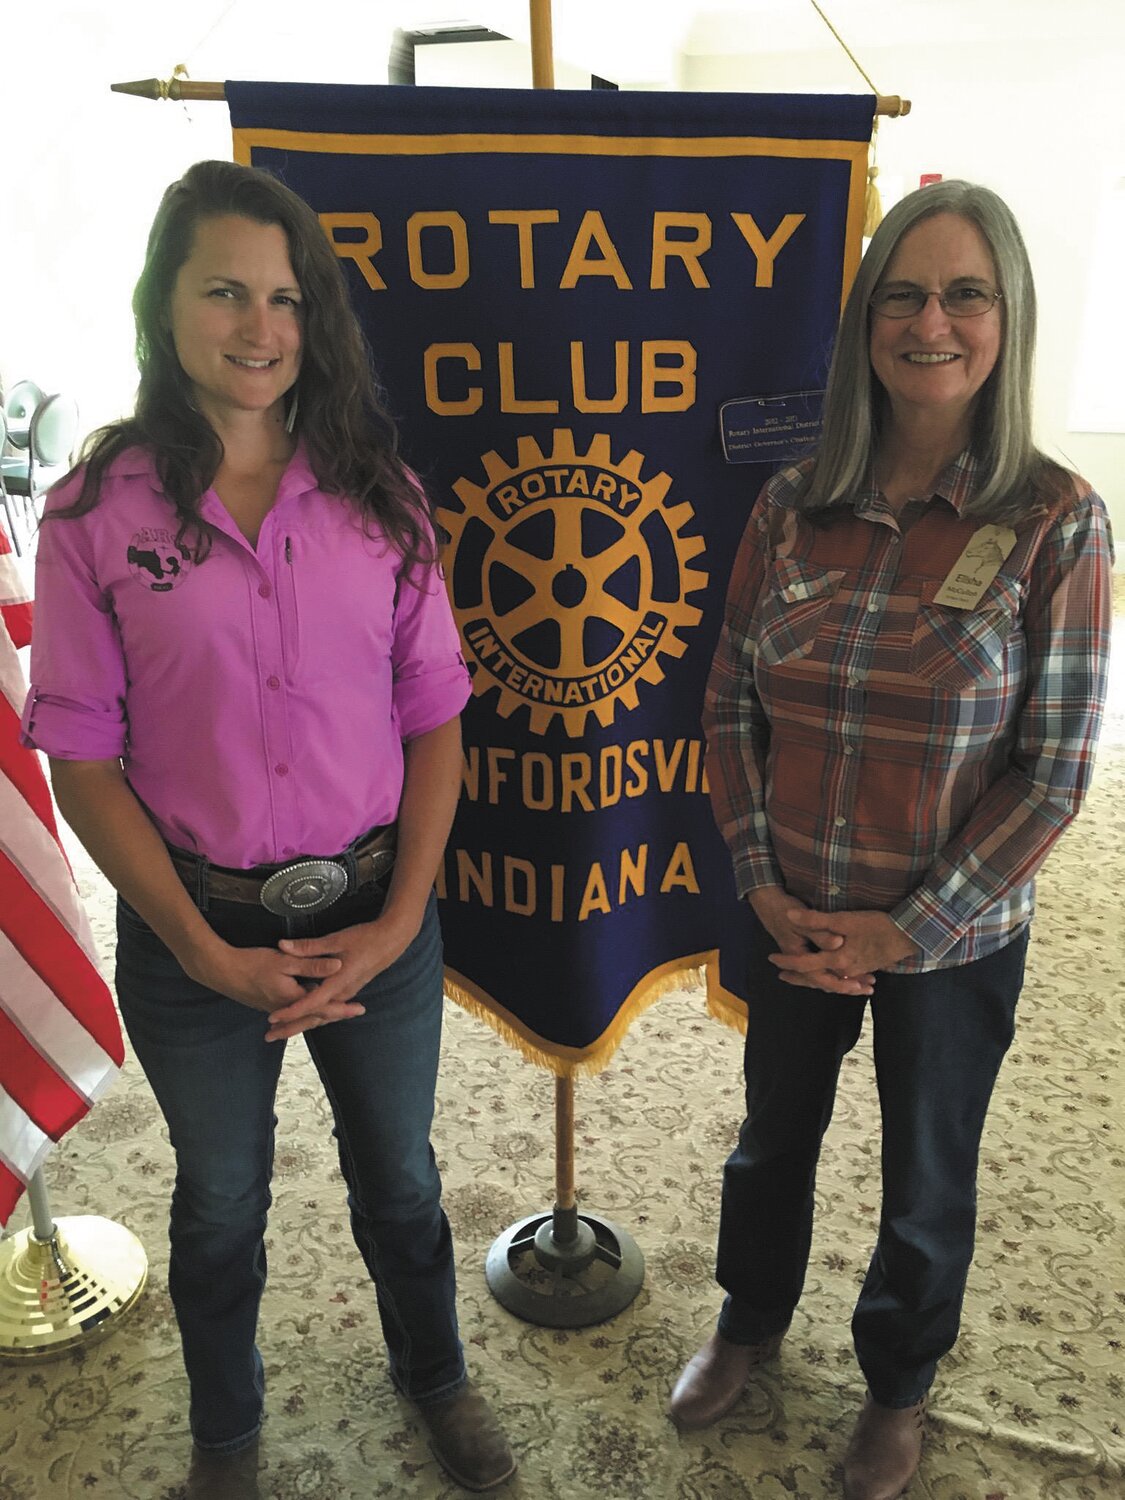 Elisha McColloh, executive director, and Nicole Wilson, managing director, of Achaius Ranch spoke to the Crawfordsville Rotary Club on Thursday. Achaius Ranch is located near Ladoga and is a place where people can spend time in nature, with horses and other animals, many of which have been abused, neglected, and unwanted. A Christ-centered, loving environment that helps bring healing and growth to the young people. Achaius Ranch offers many programs such as Equine Assisted Learning, Ecotherapy Nature-based Therapy and a Summer Youth Program for ages 8-18. One morning per week for eight weeks, there are group activities and individualized attention. Why is Achaius Ranch needed? The need is greater than what our community can address. Teachers are struggling  to meet the needs of their students. Drugs, vape use explosion, alcohol use, decreased motivation, broken homes, anxiety, anger, depression and aggression are on the rise. Visit online at www.achaiusranch.org.